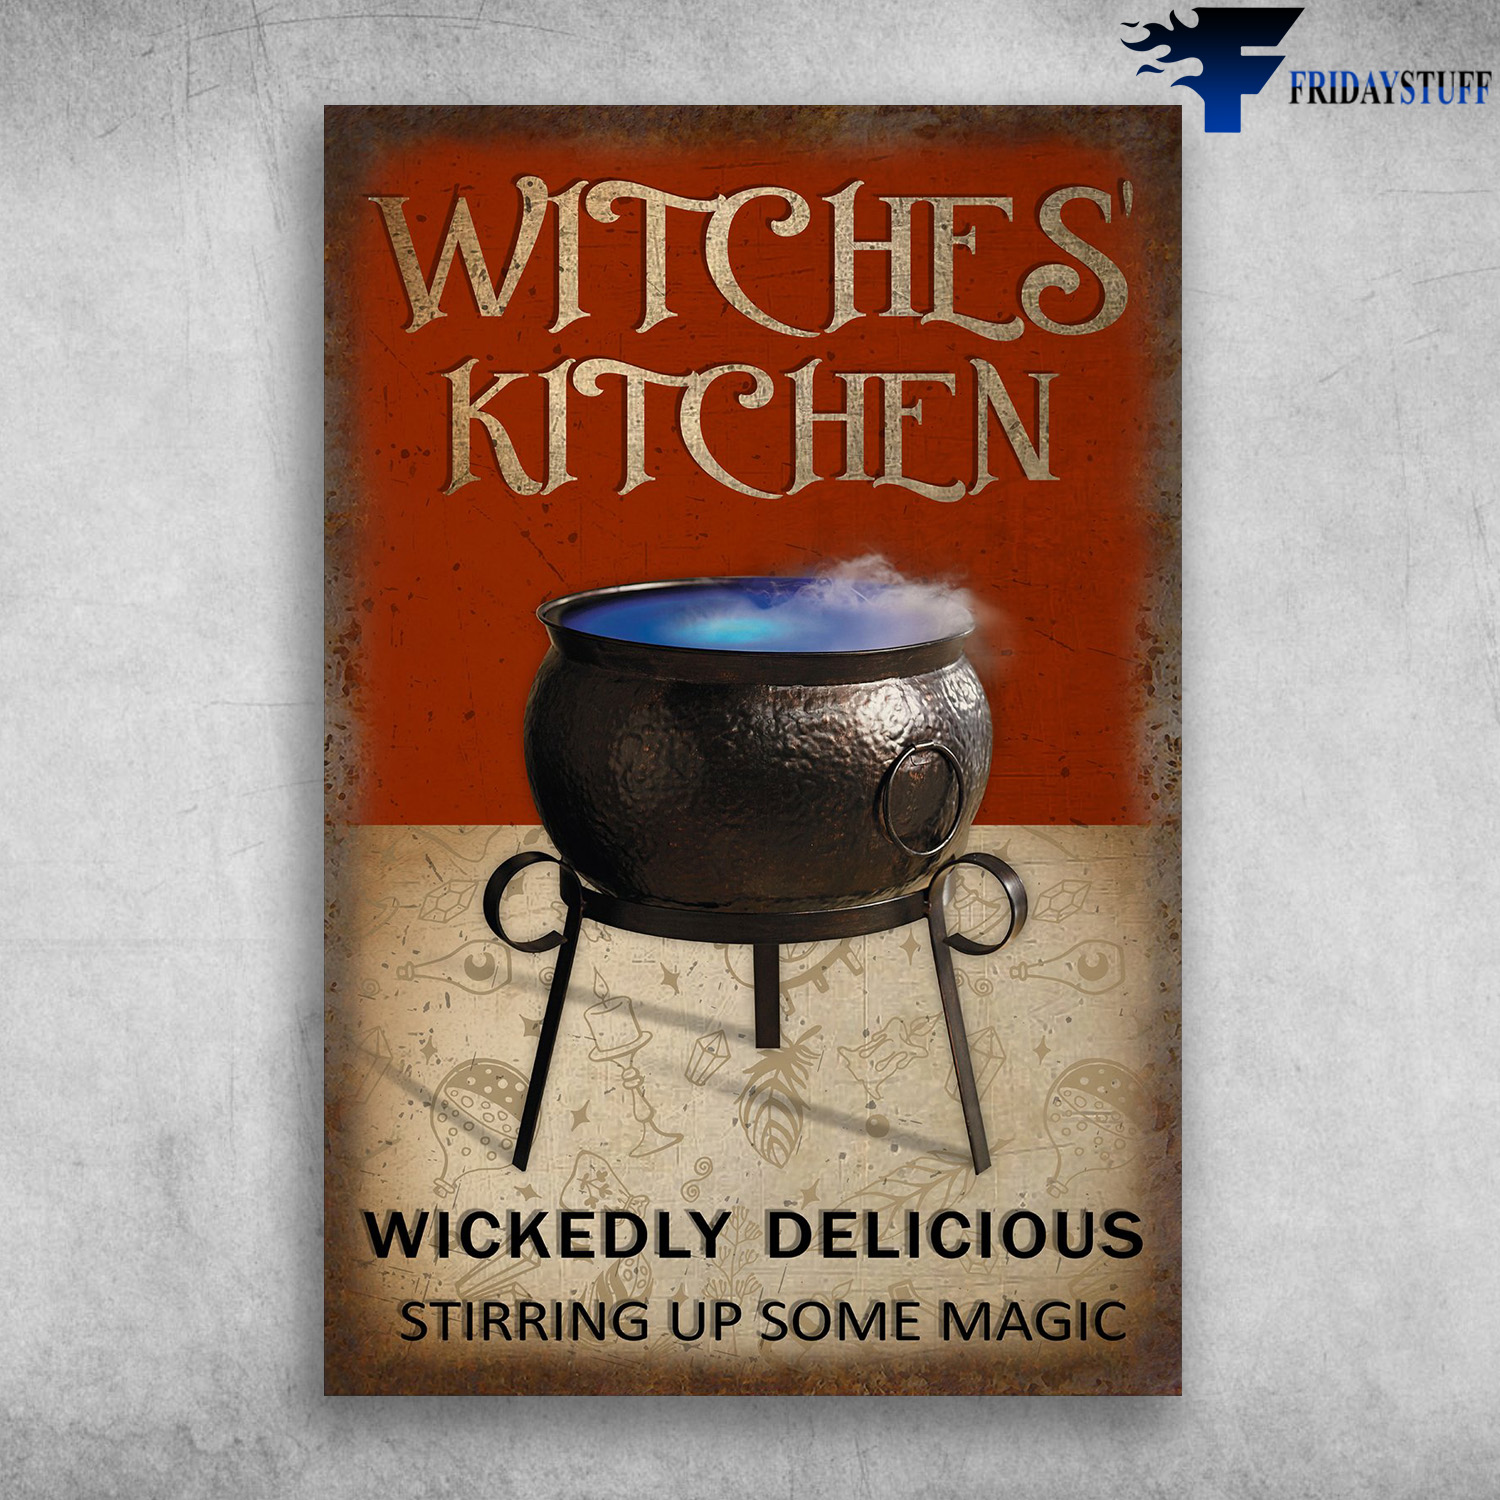 Witches's Kitchen - Wickedly Delicious, Stirring Up Some Magic